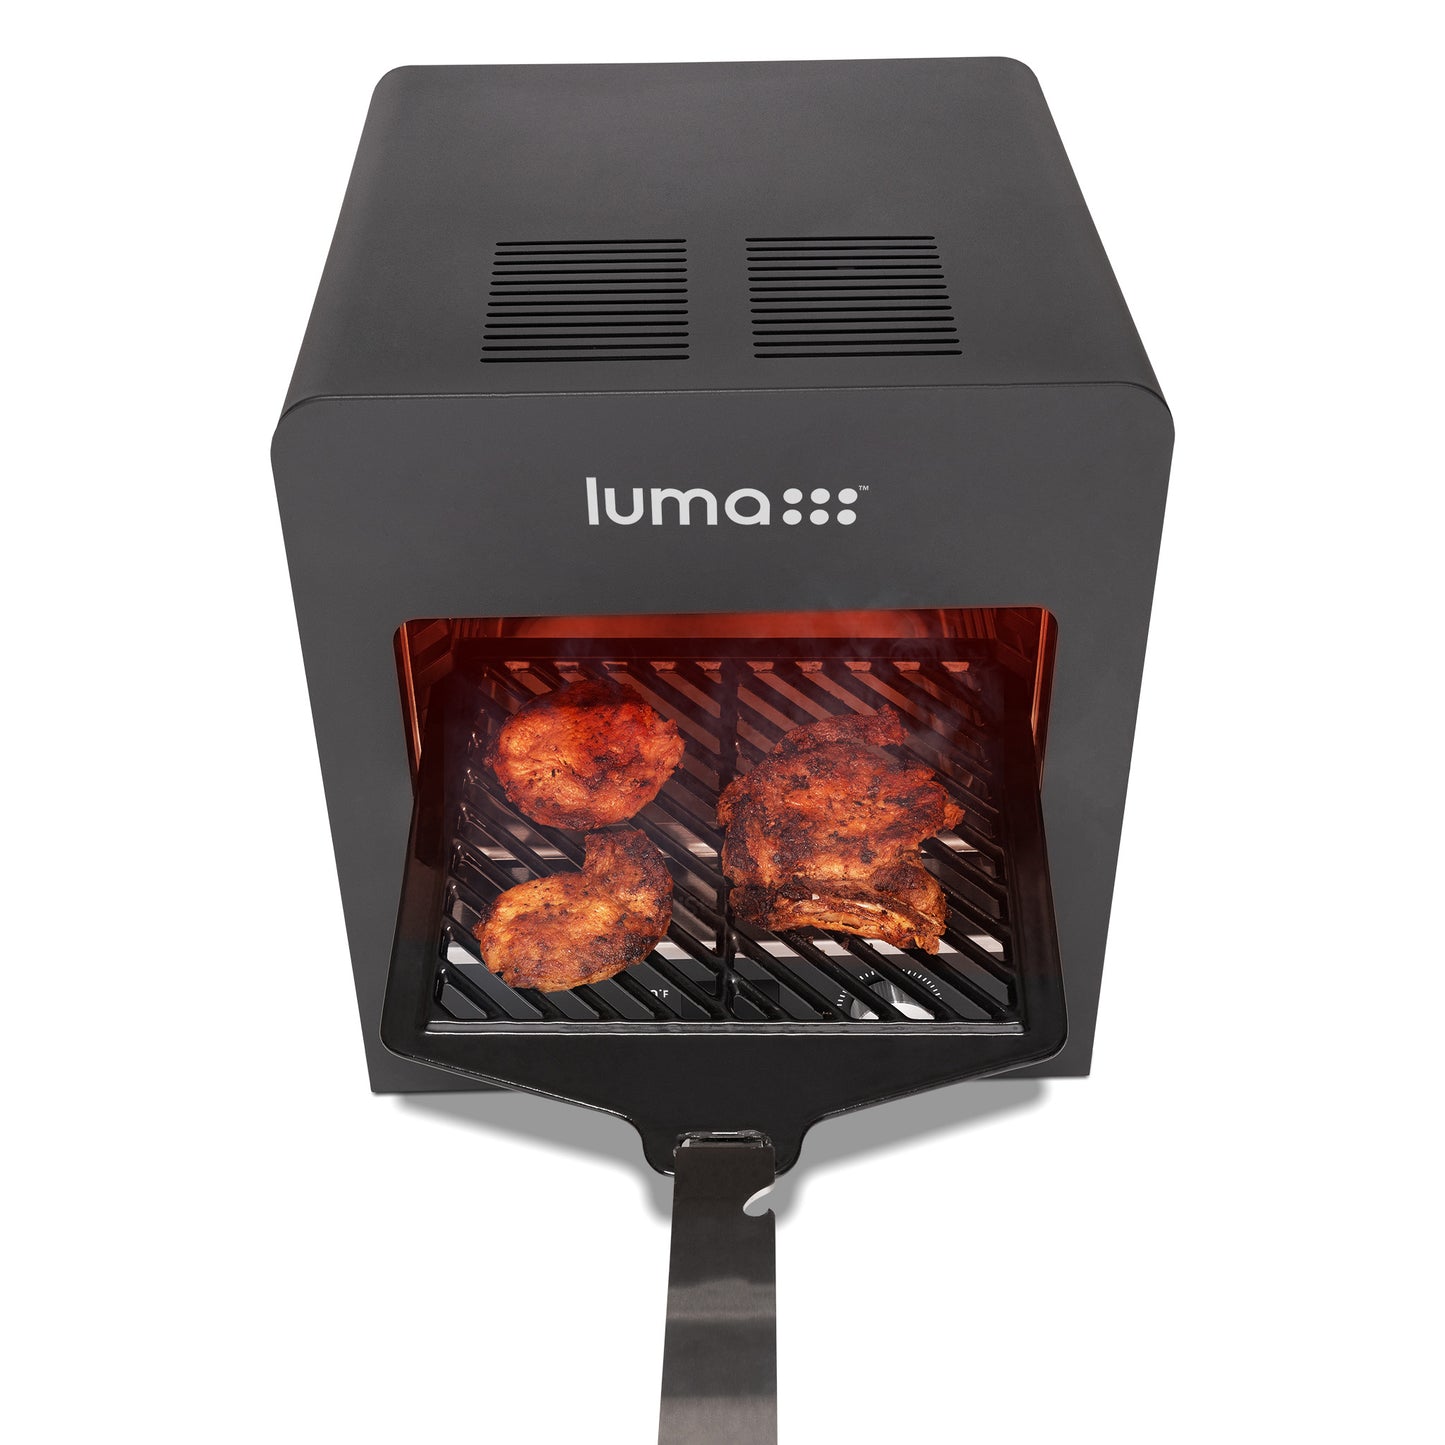 Luma Electric Steak Grill, Portable Indoor Countertop Oven with Griddle, Smokeless Electric Infrared Grill, Heats up to 1450 Degrees, BBQ, Grill, Toast, and Broil Chicken, Beef, Pork, and Vegetables, Cook Steak Meat in Minutes